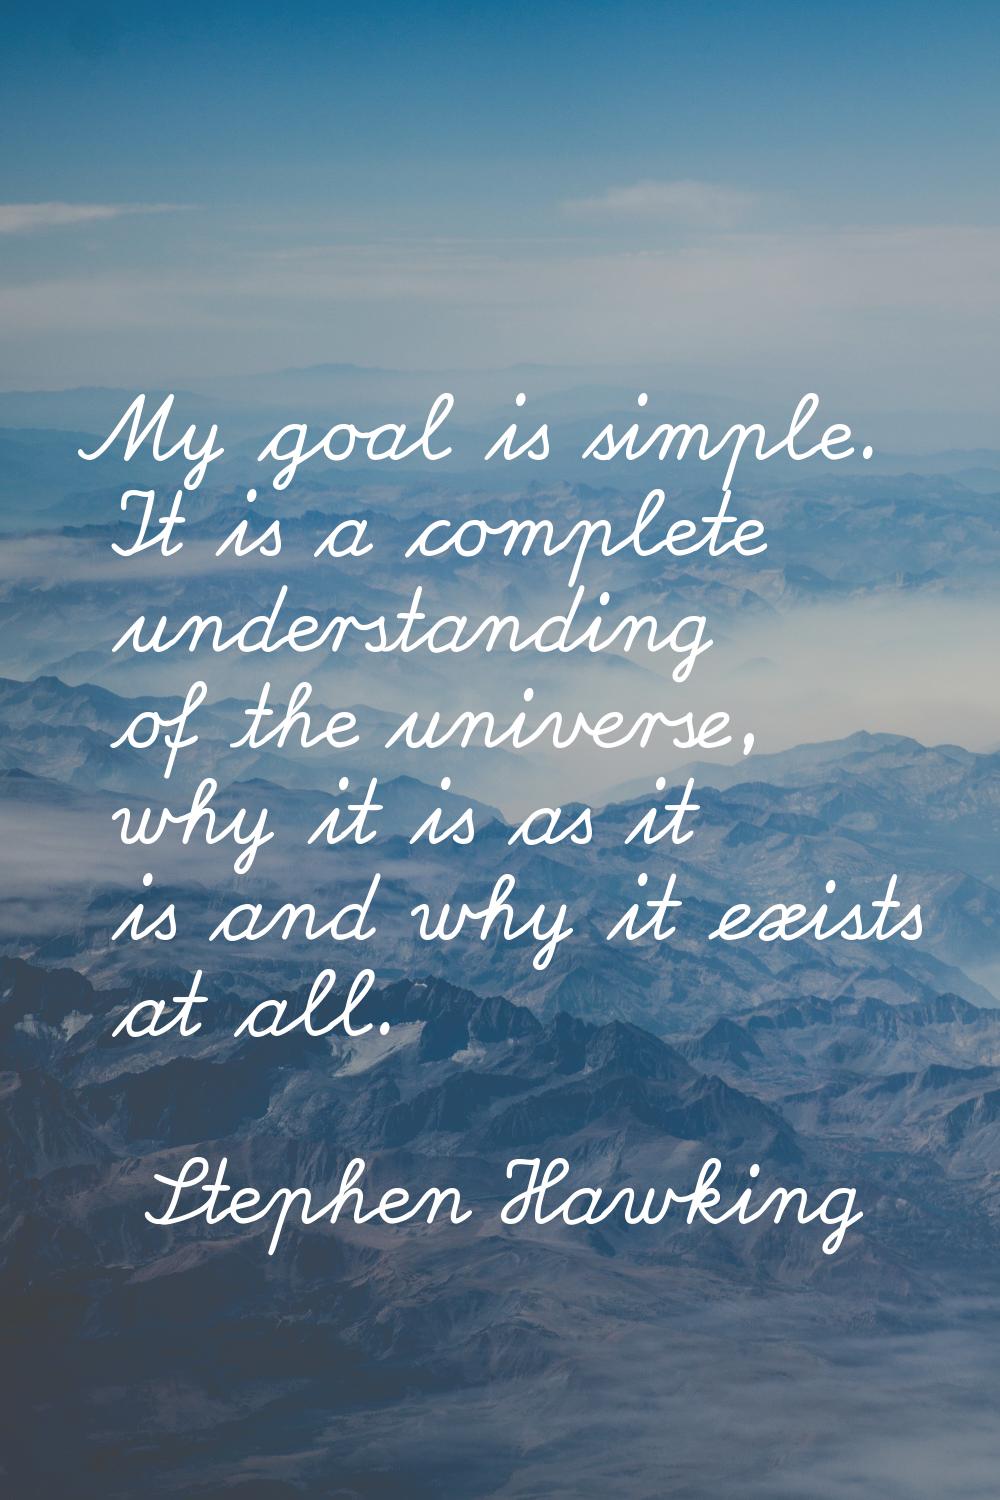 My goal is simple. It is a complete understanding of the universe, why it is as it is and why it ex